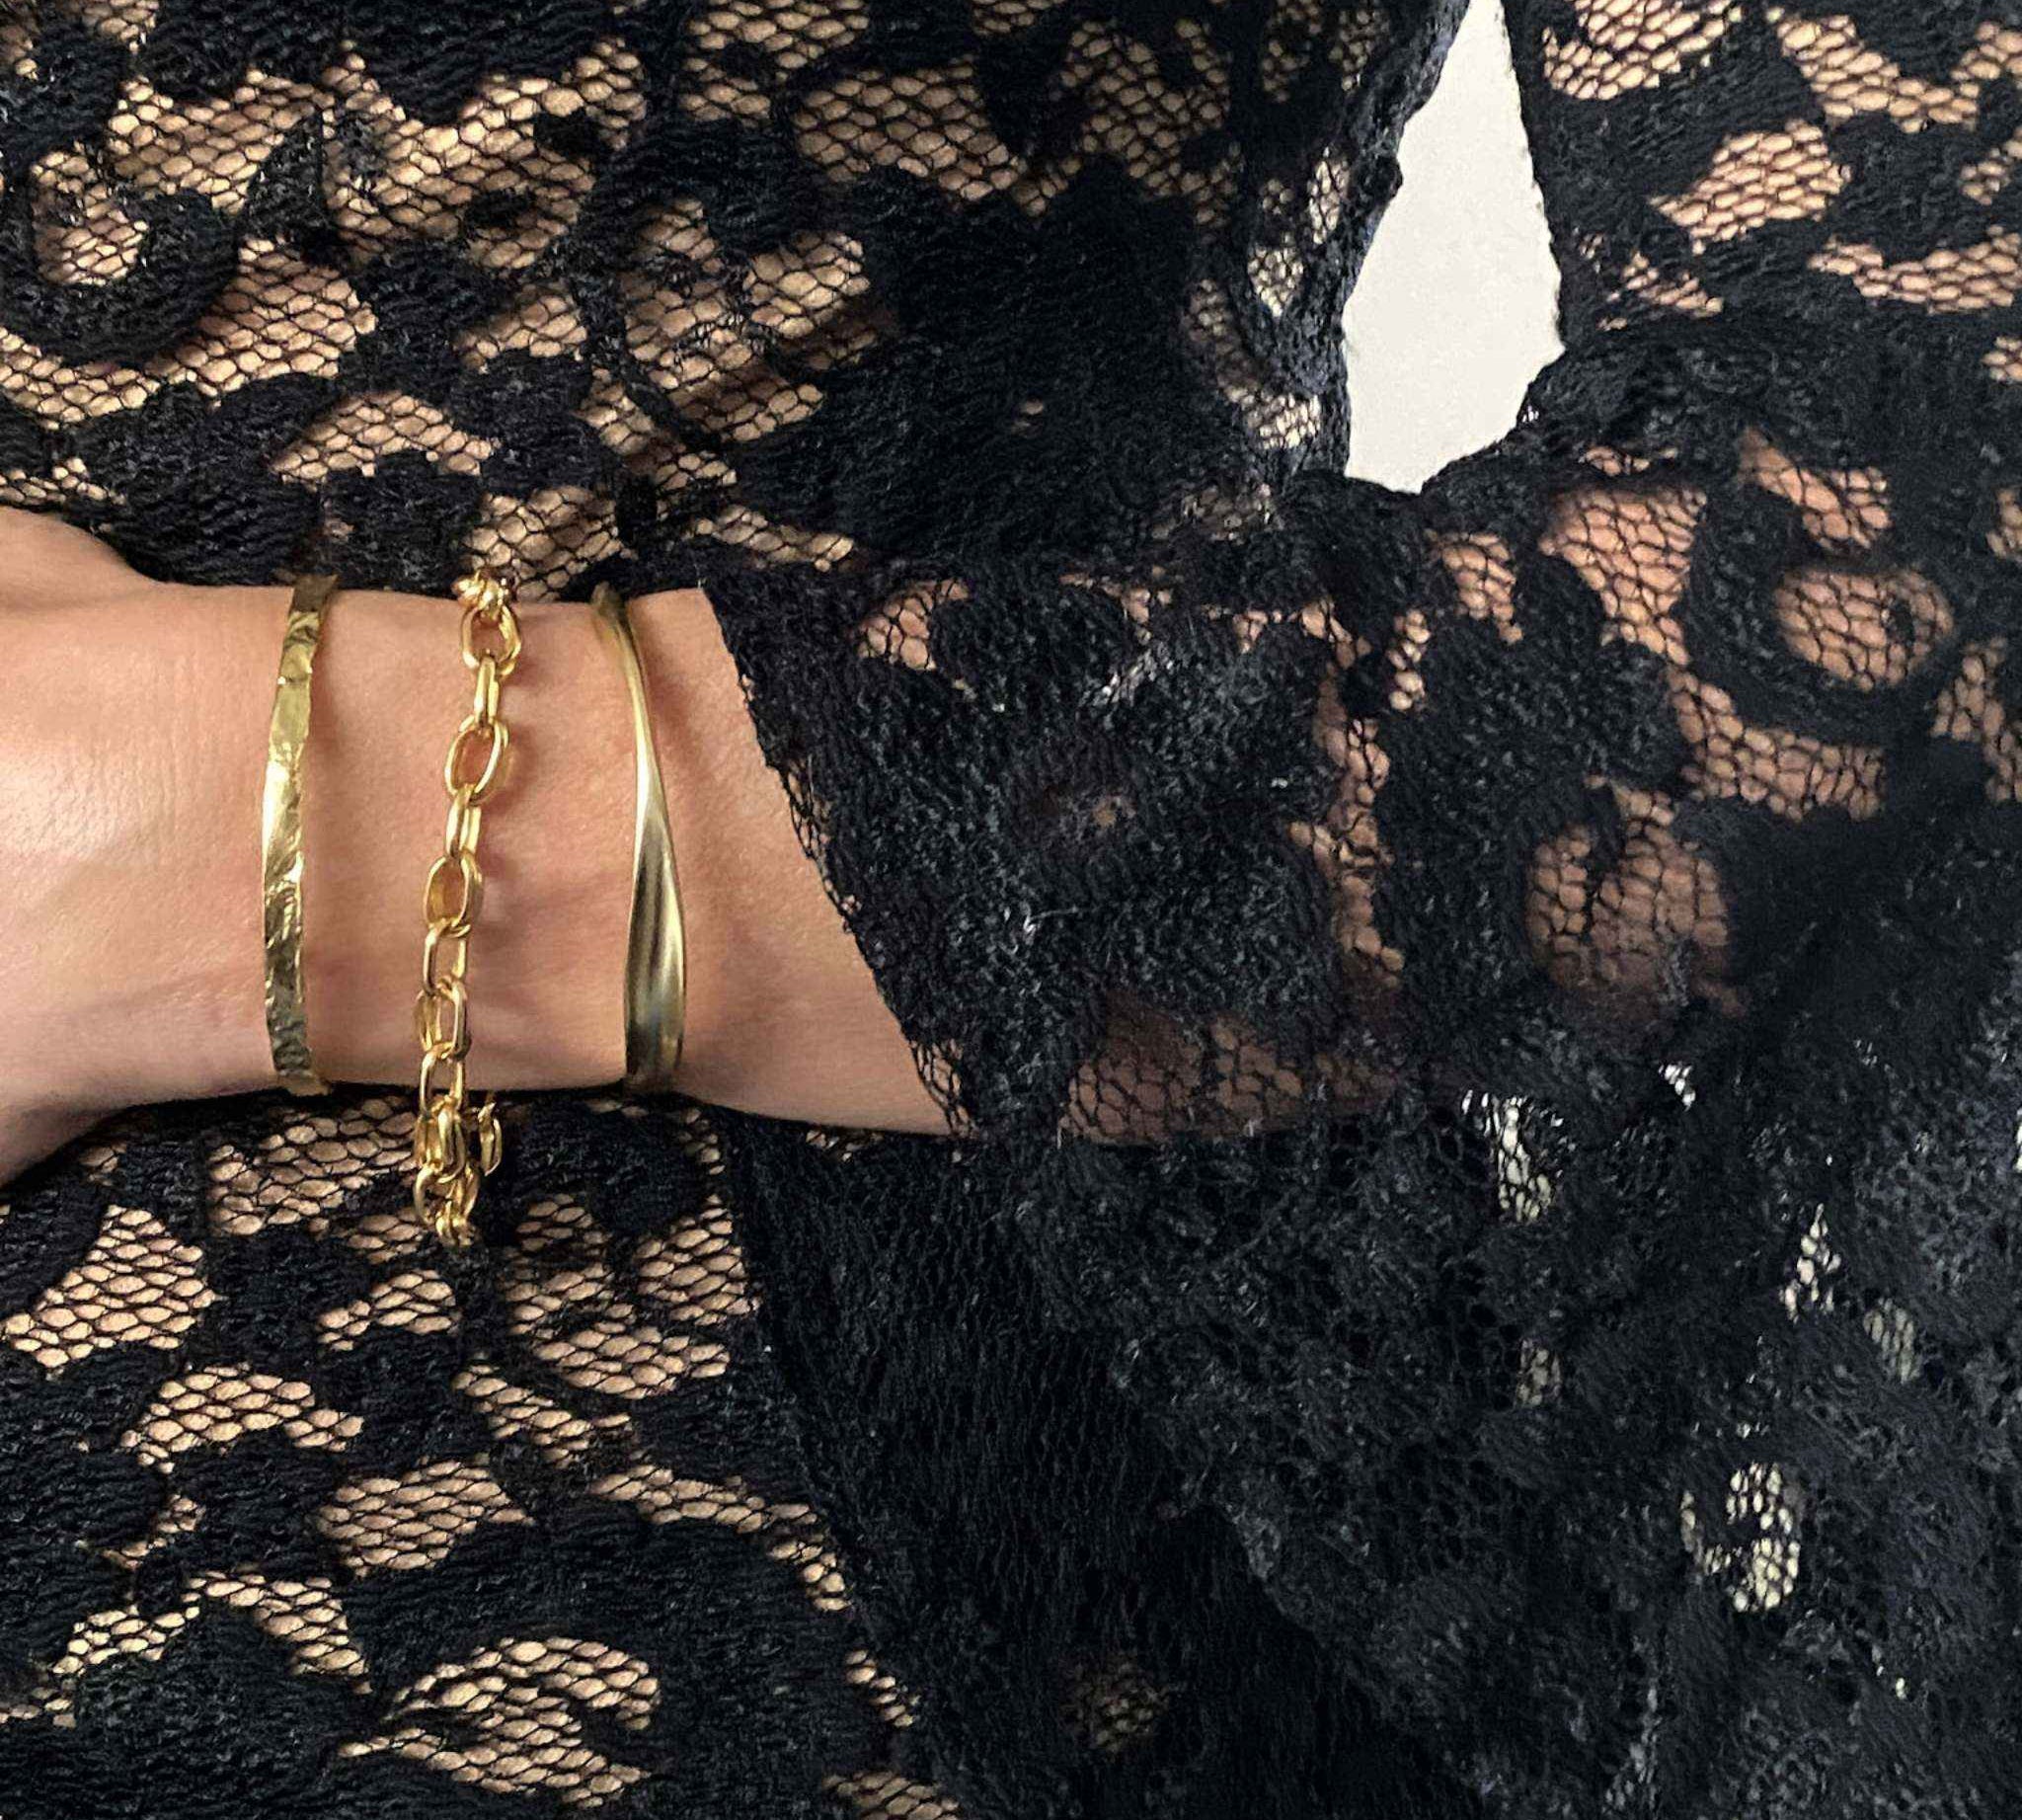 Gold Foil Textured Bangle styled with other luxury jewelry pieces, highlighting its versatility.